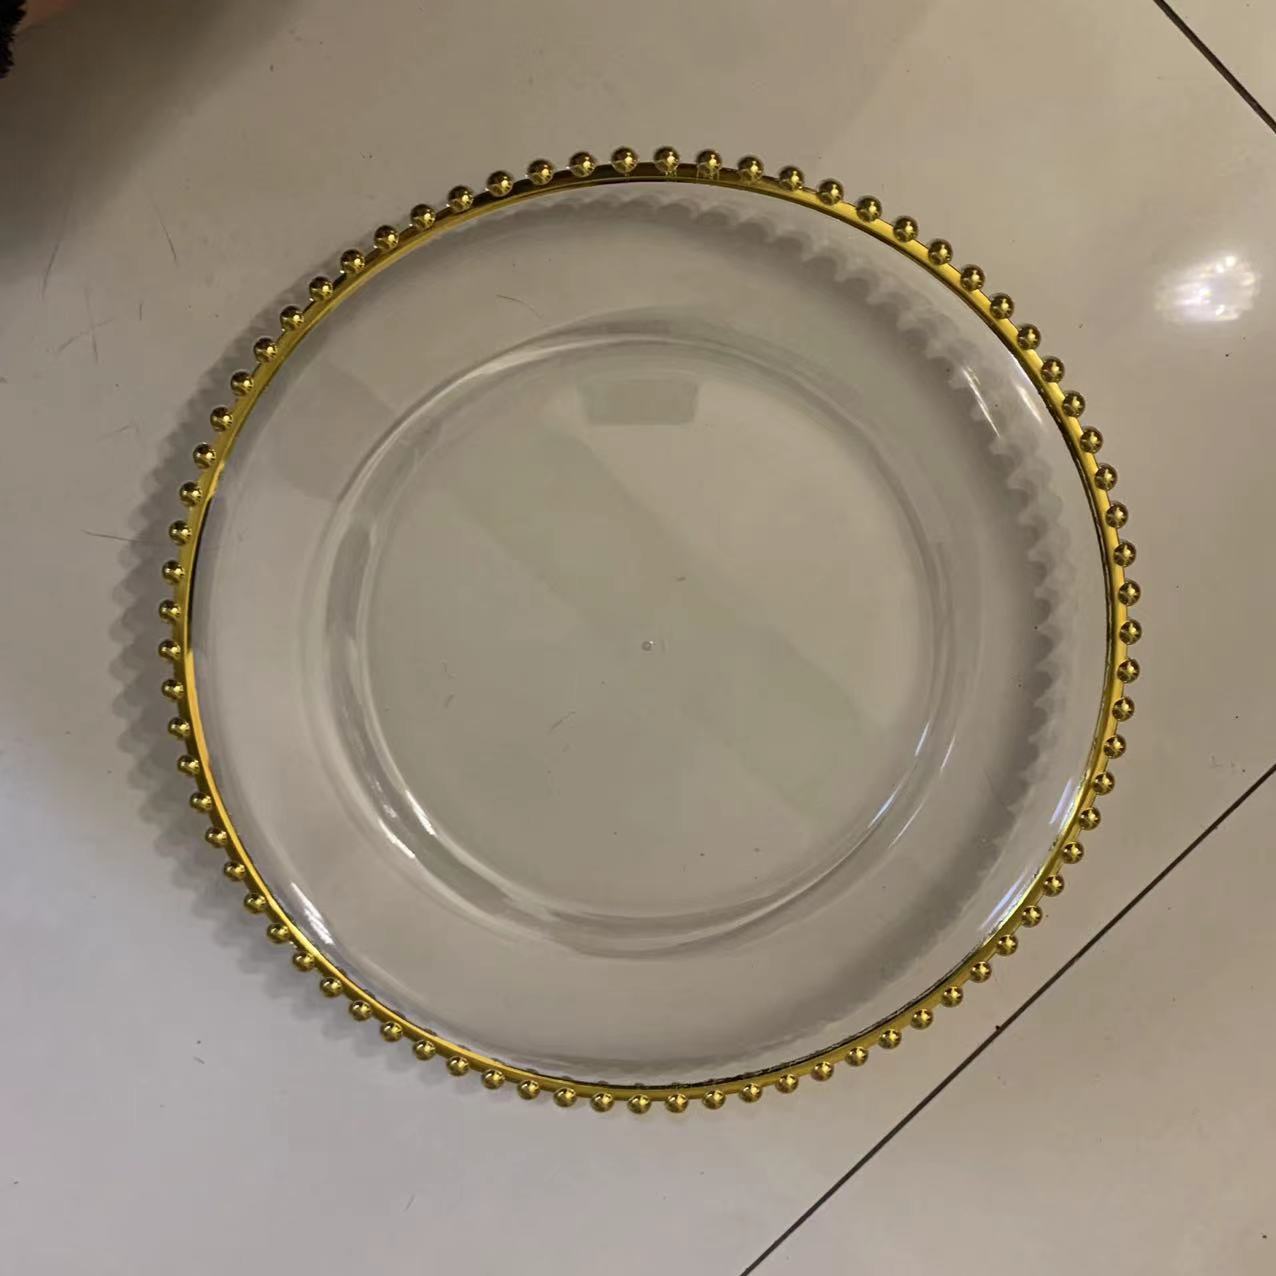 13inch Round plastic Rim Charger Plates Gold Round Reef plastic Charger Plates for Dinner,Wedding,Party,Event Decoration.